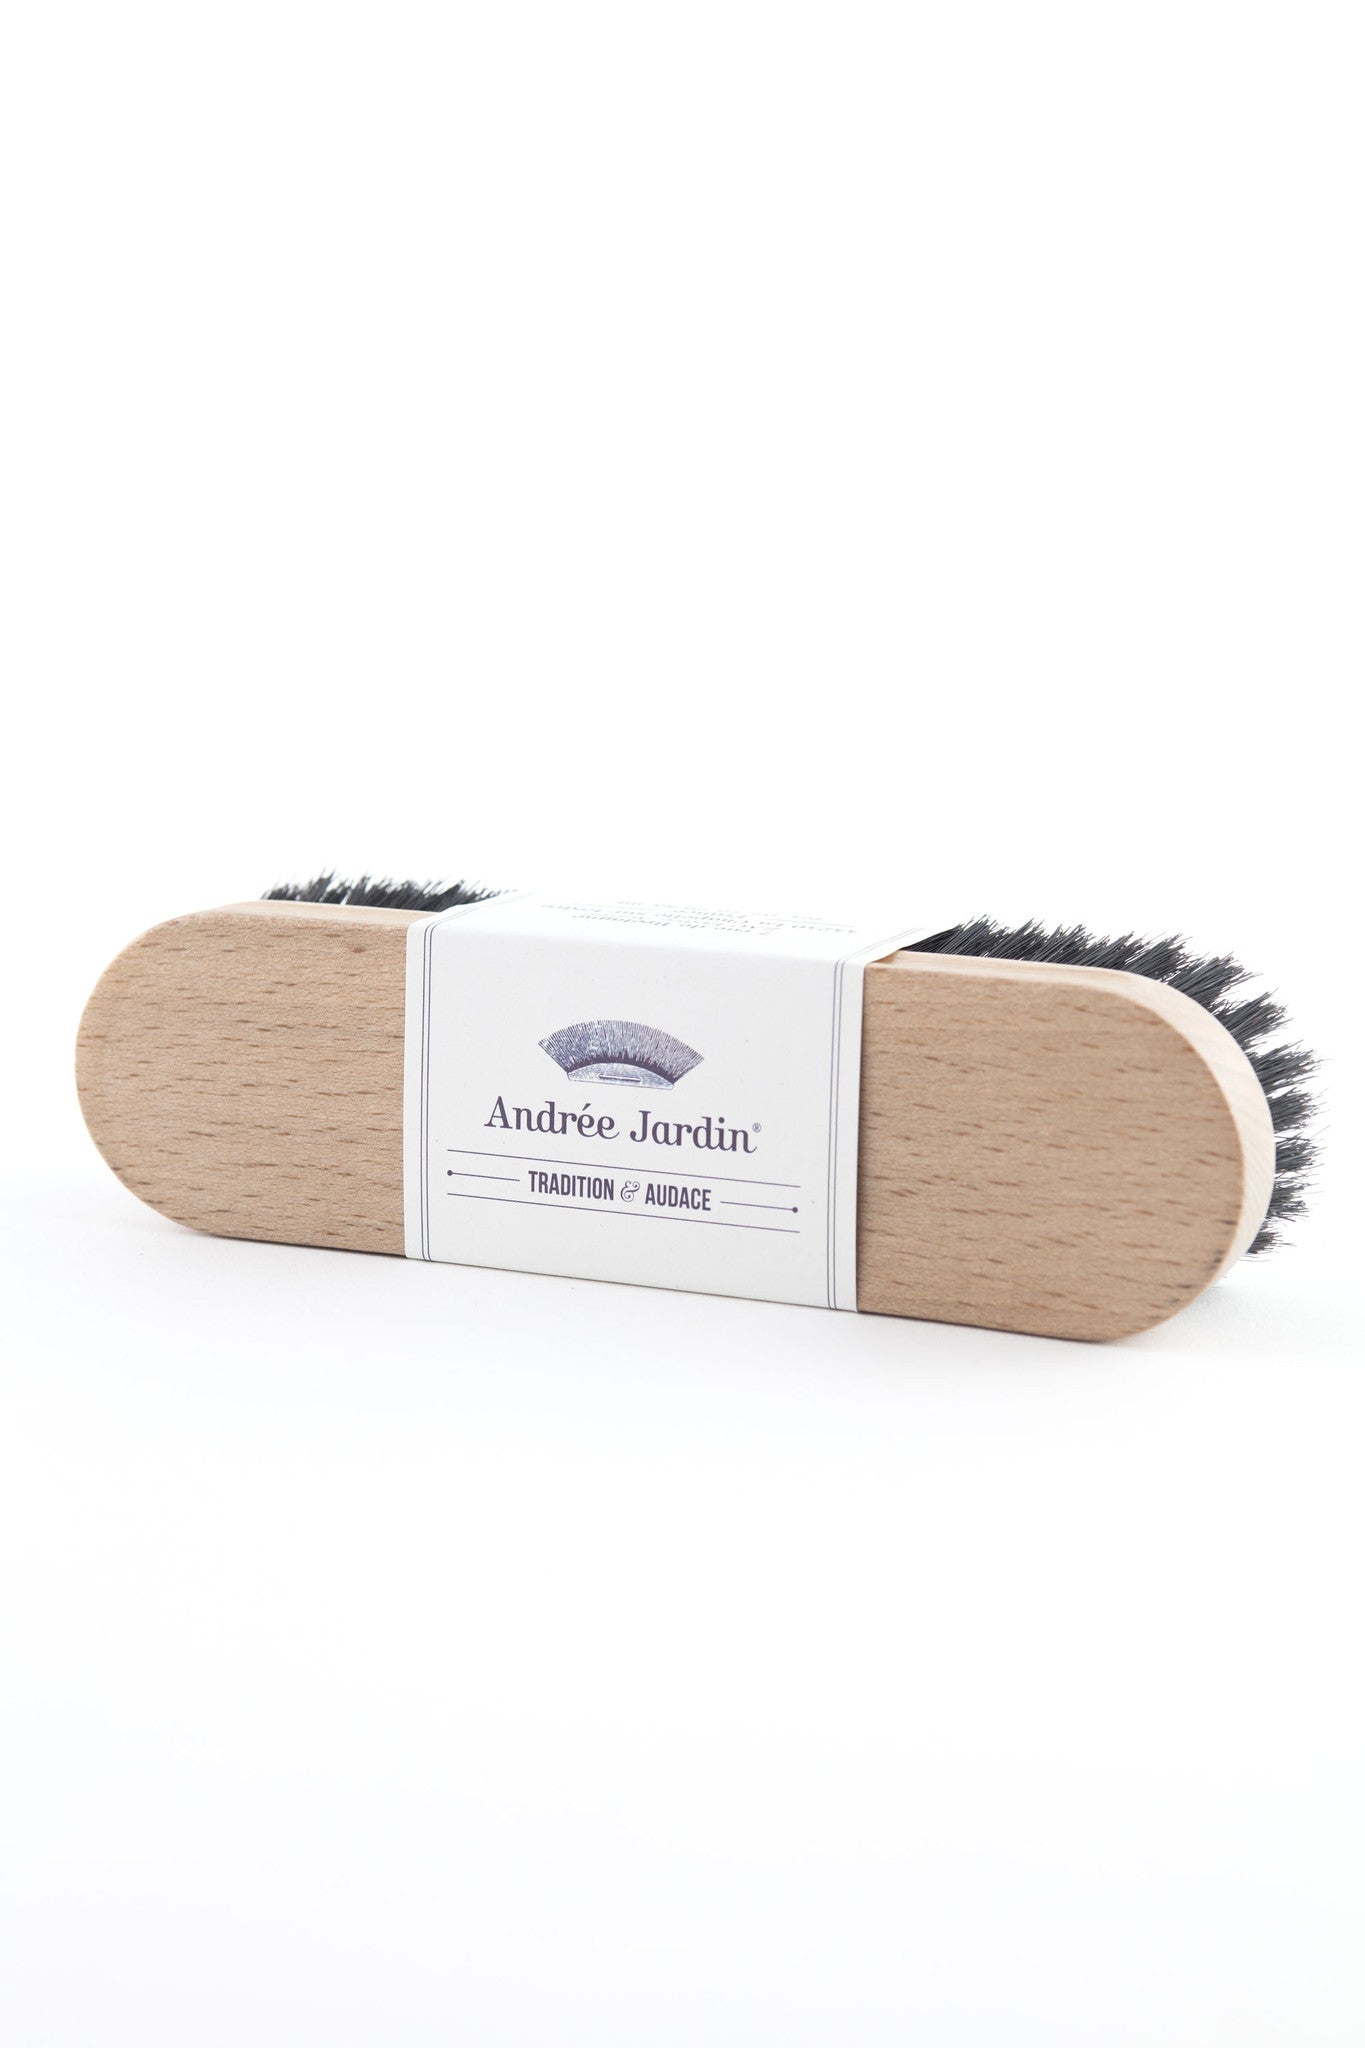 Andrée Jardin Tradition Clothing Brush Utilities Andrée Jardin Andrée Jardin Brand_Andrée Jardin Home_Broom Sets Home_Household Cleaning Shoe & Textile Brushes 5300-1712_Clothing_Brush_A